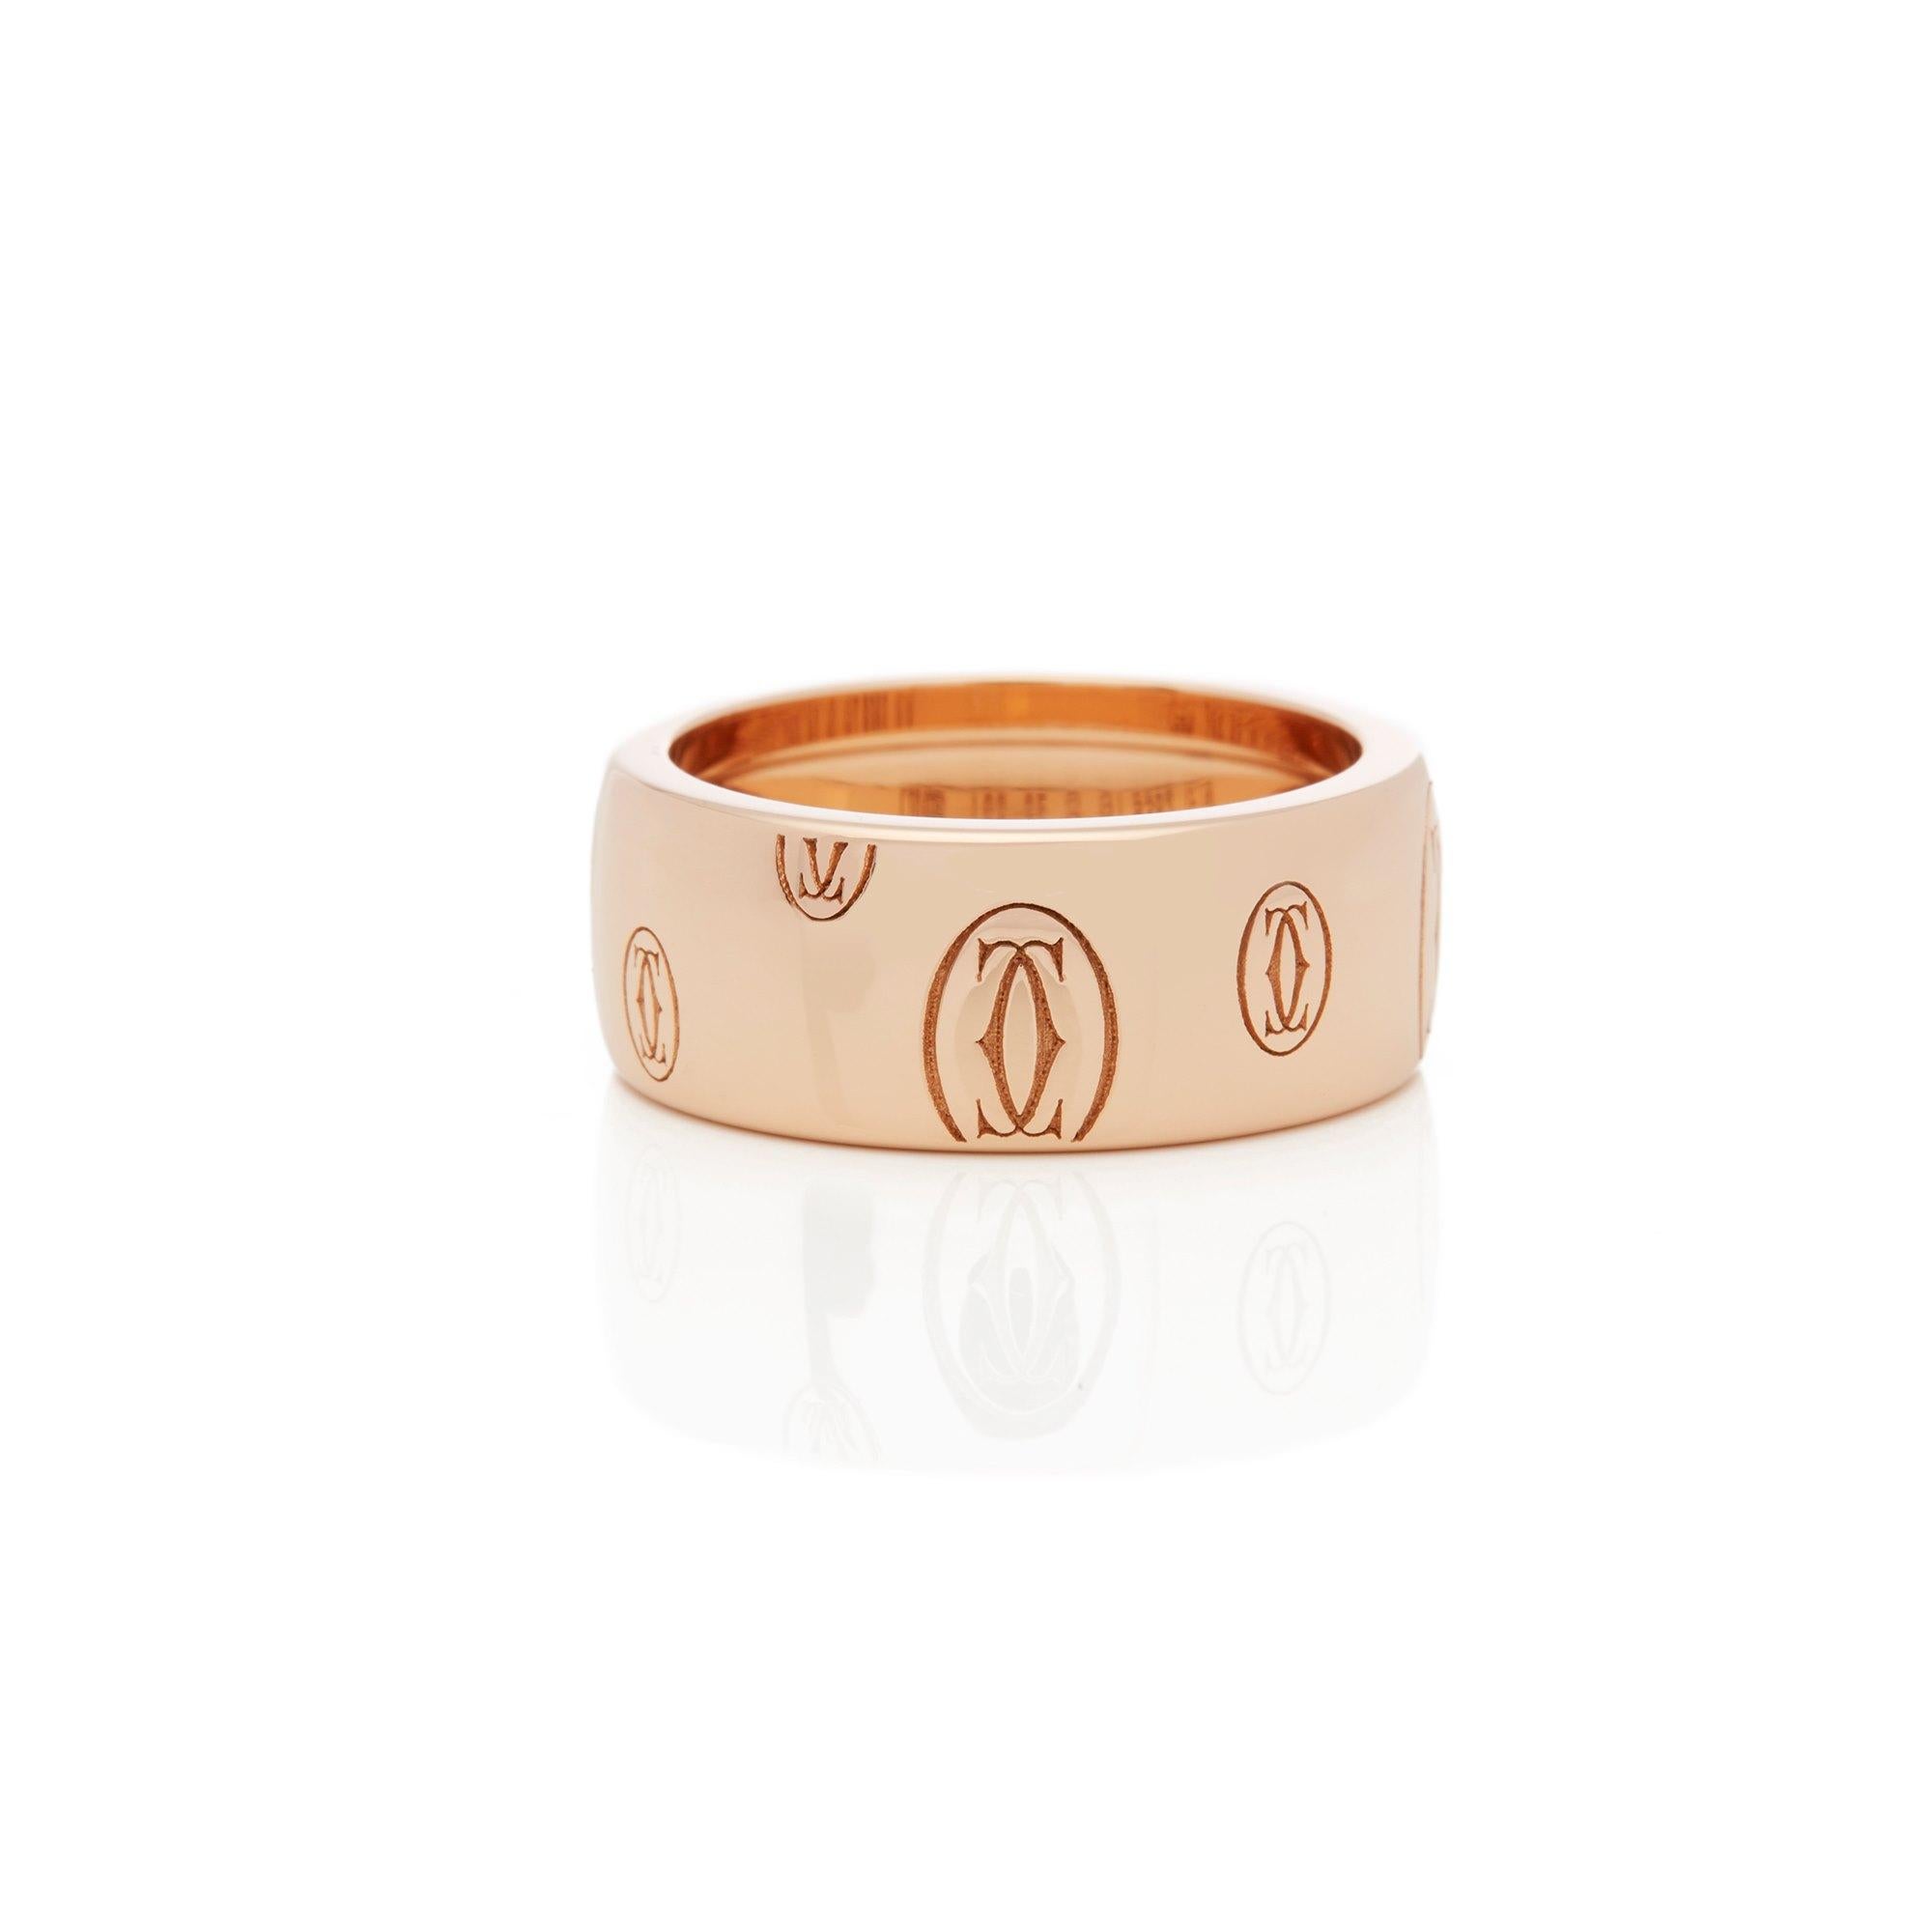 This Ring by Cartier is from their Happy Birthday Collection and Features the Cartier Motif Mounted in an 18k Rose Gold Band. Complete with Cartier Box and Original Cartier Warranty Paper. The Ring sizes are UK Ring Size: M, EU Ring Size: 52, US